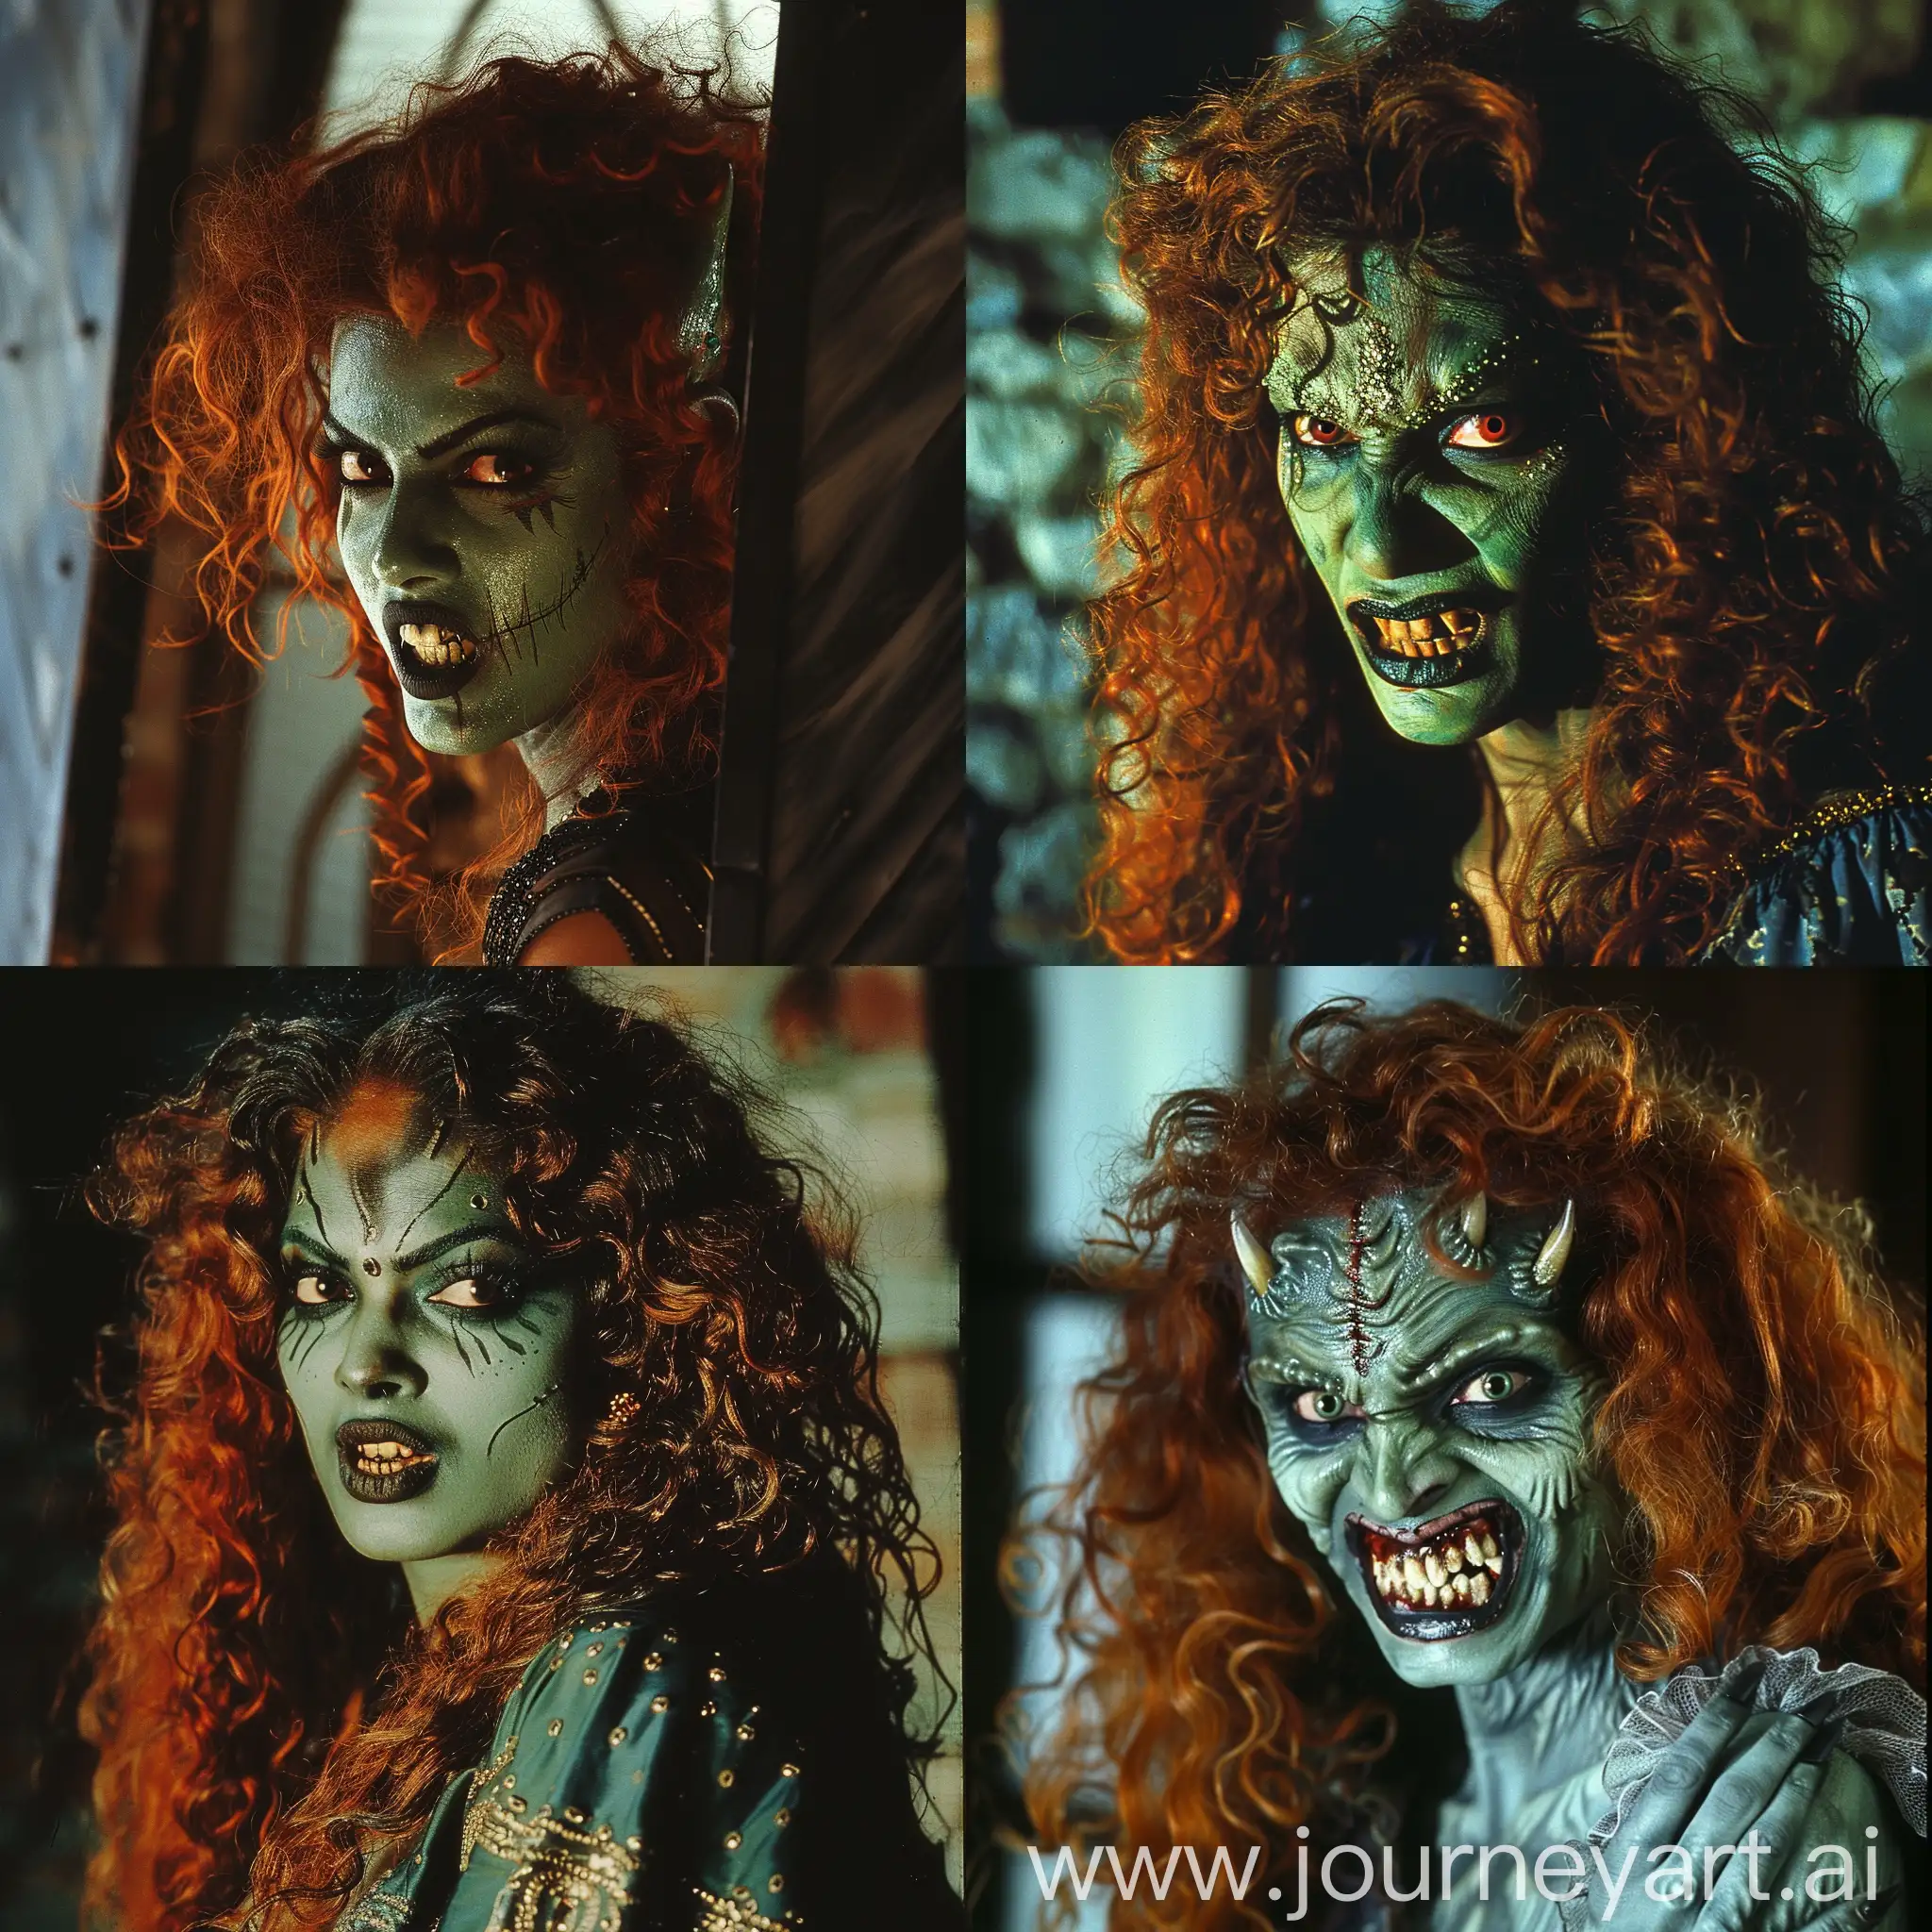 fit female Malayali demon with dark greyish-green skin, curly redhead, attractive green face, enlarged sharp eyebrow ridges and cheekbones, vampire fangs, special makeup effects by Tom Savini, half body shot, film scene from a 1980s horror movie like Evil Dead by Sam Raimi and Demoni by Lamberto Bava, dehydrated